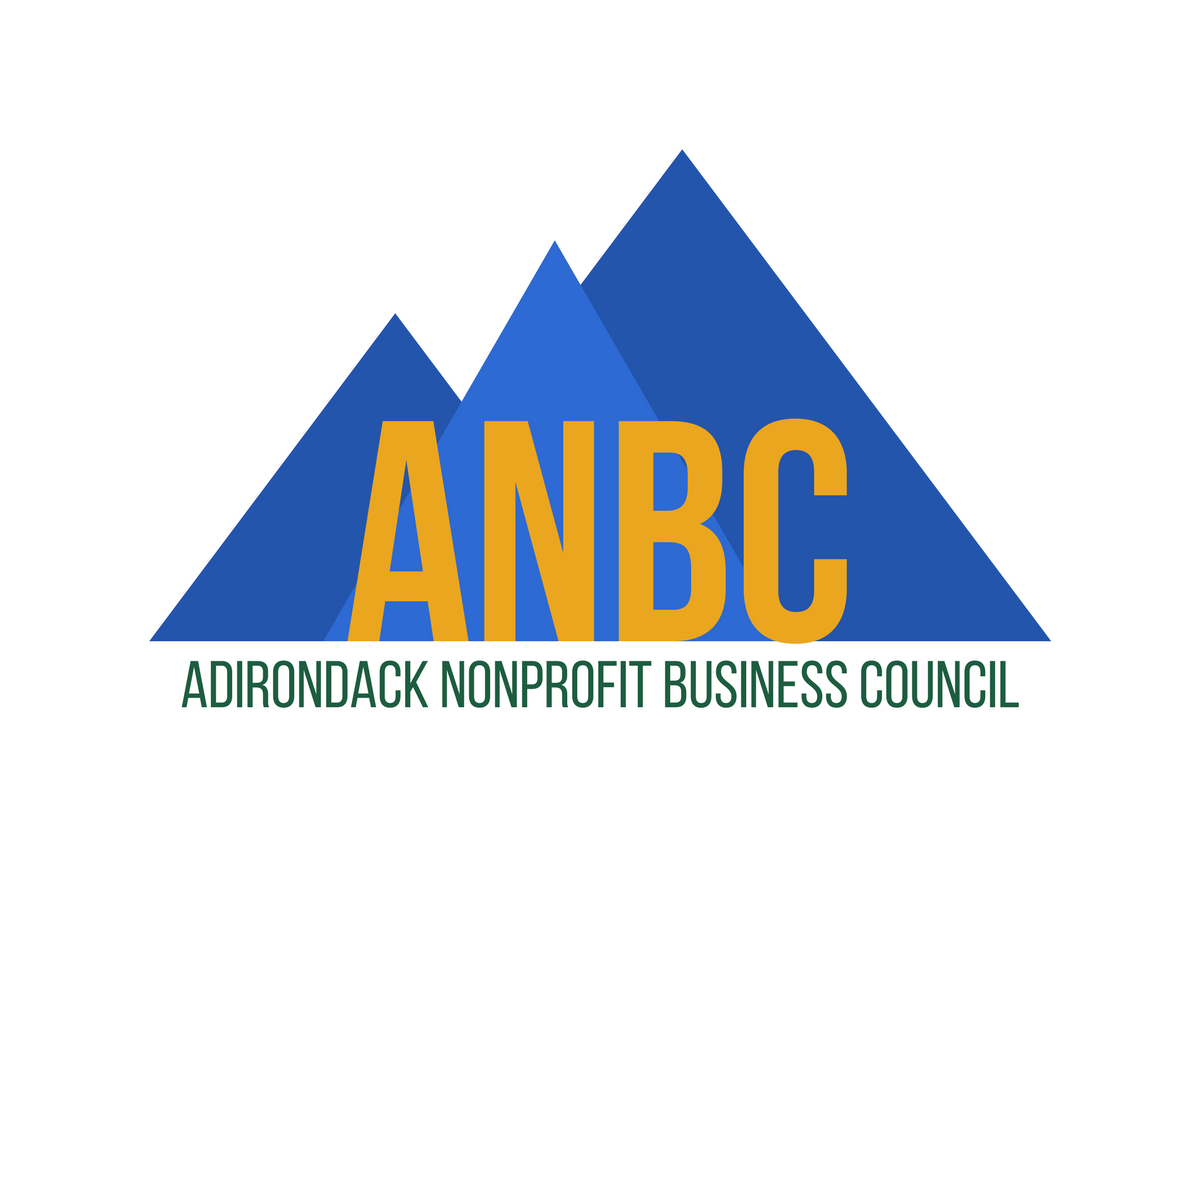 Checking in with the Adirondack Nonprofit Business Council (ANBC)